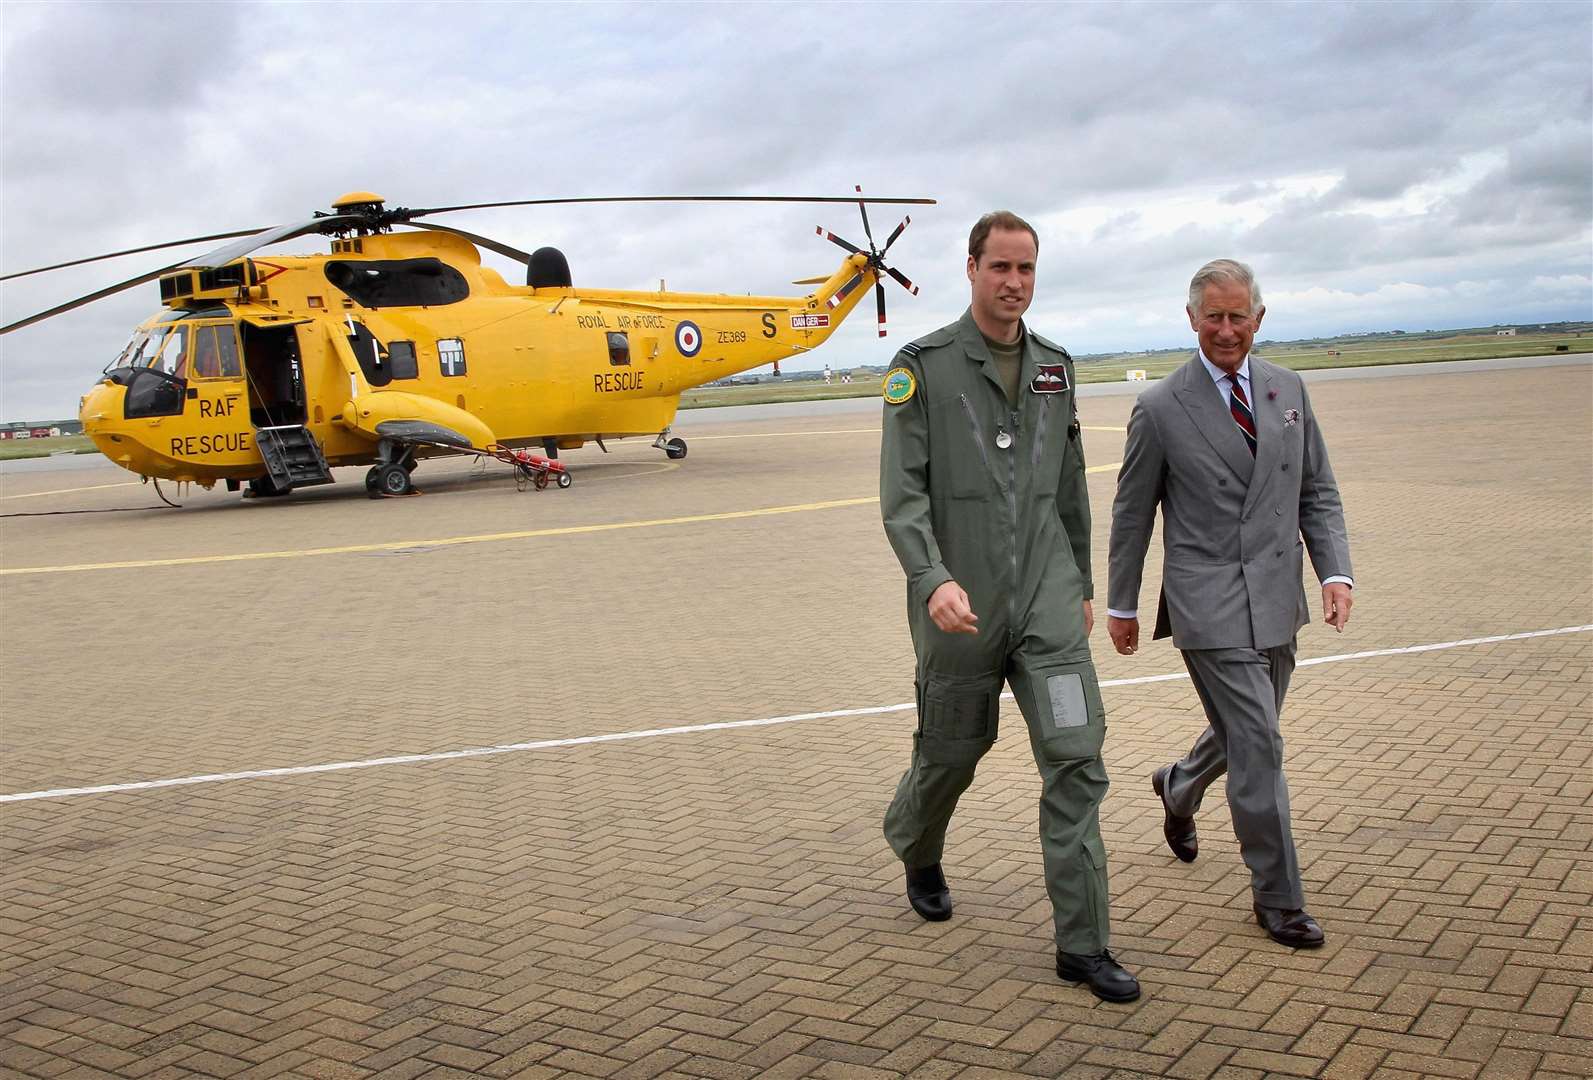 William showed his father one of the Sea King helicopters he captained at RAF Valley on Anglesey in 2012 (Chris Jackson/PA)